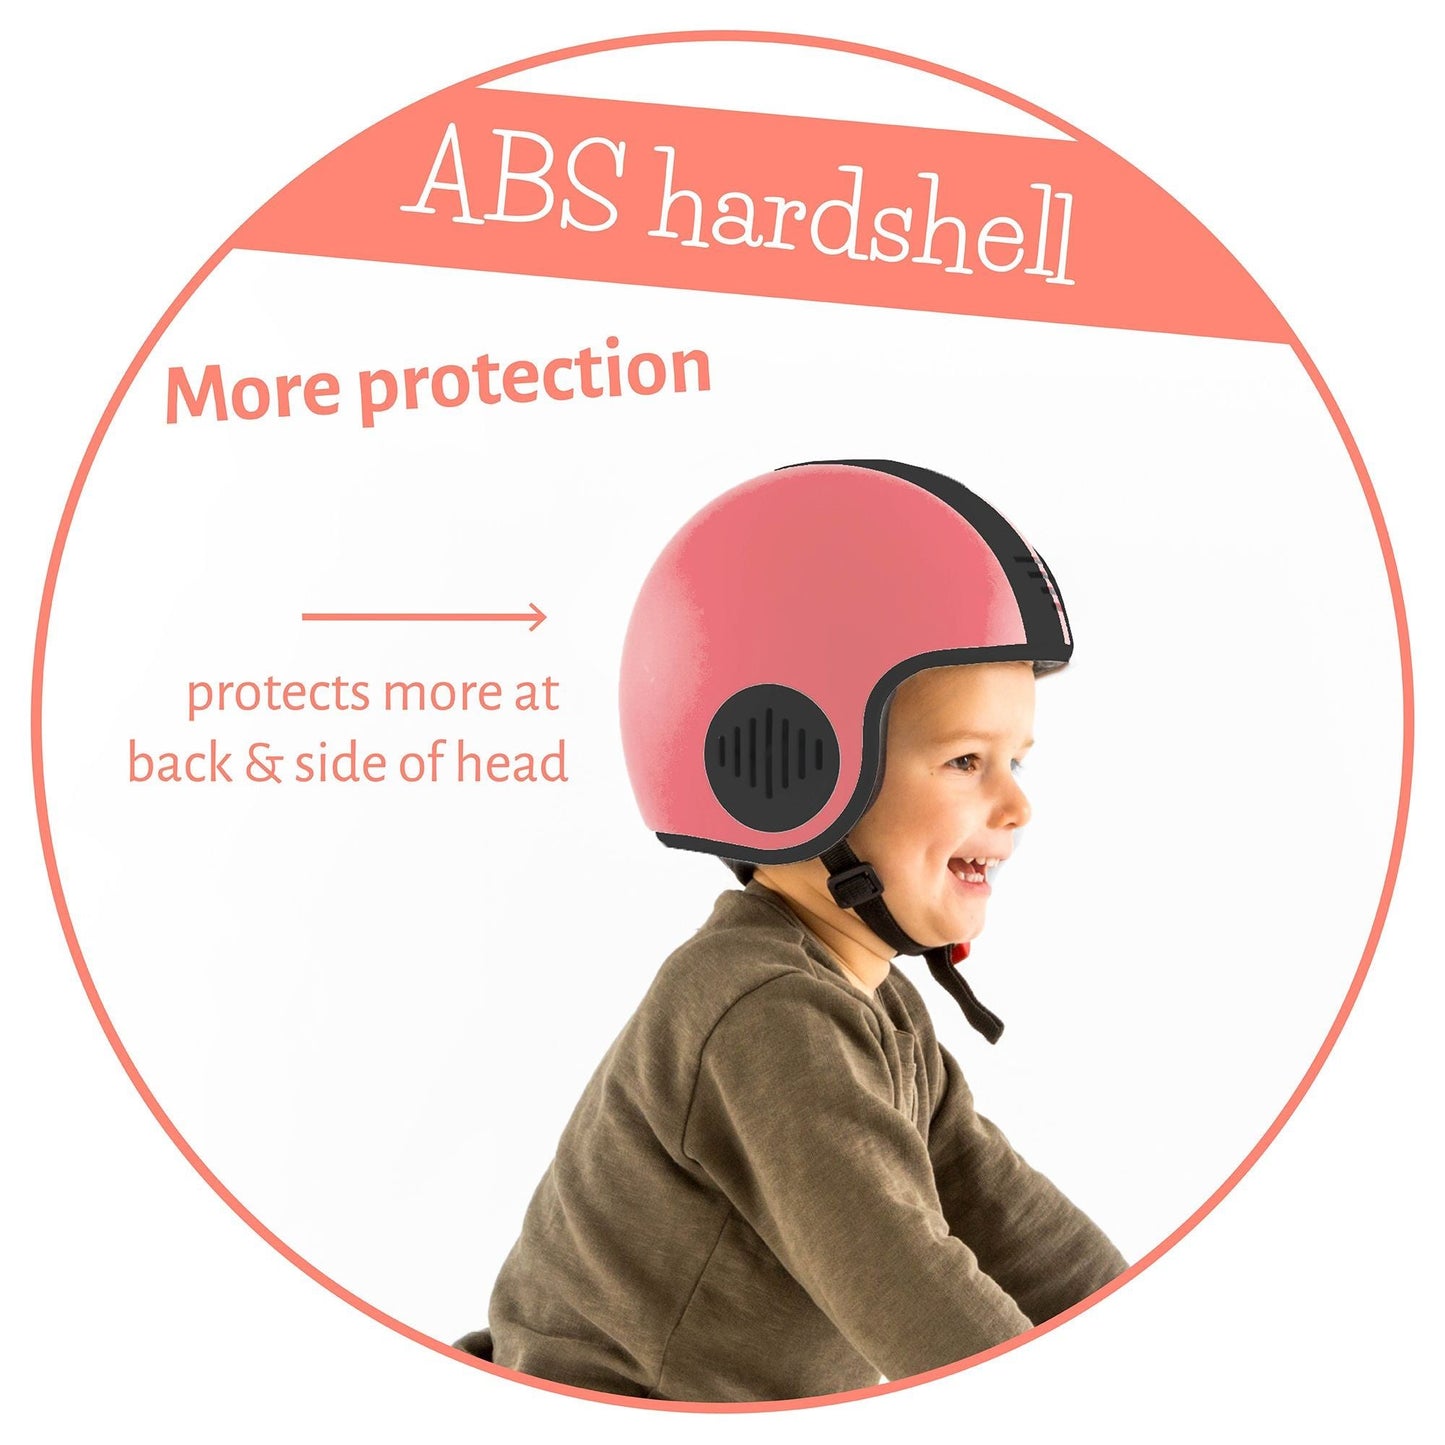 Chillafish kids Helmet Bobbi Small Rose with ABS hardshell for more protection